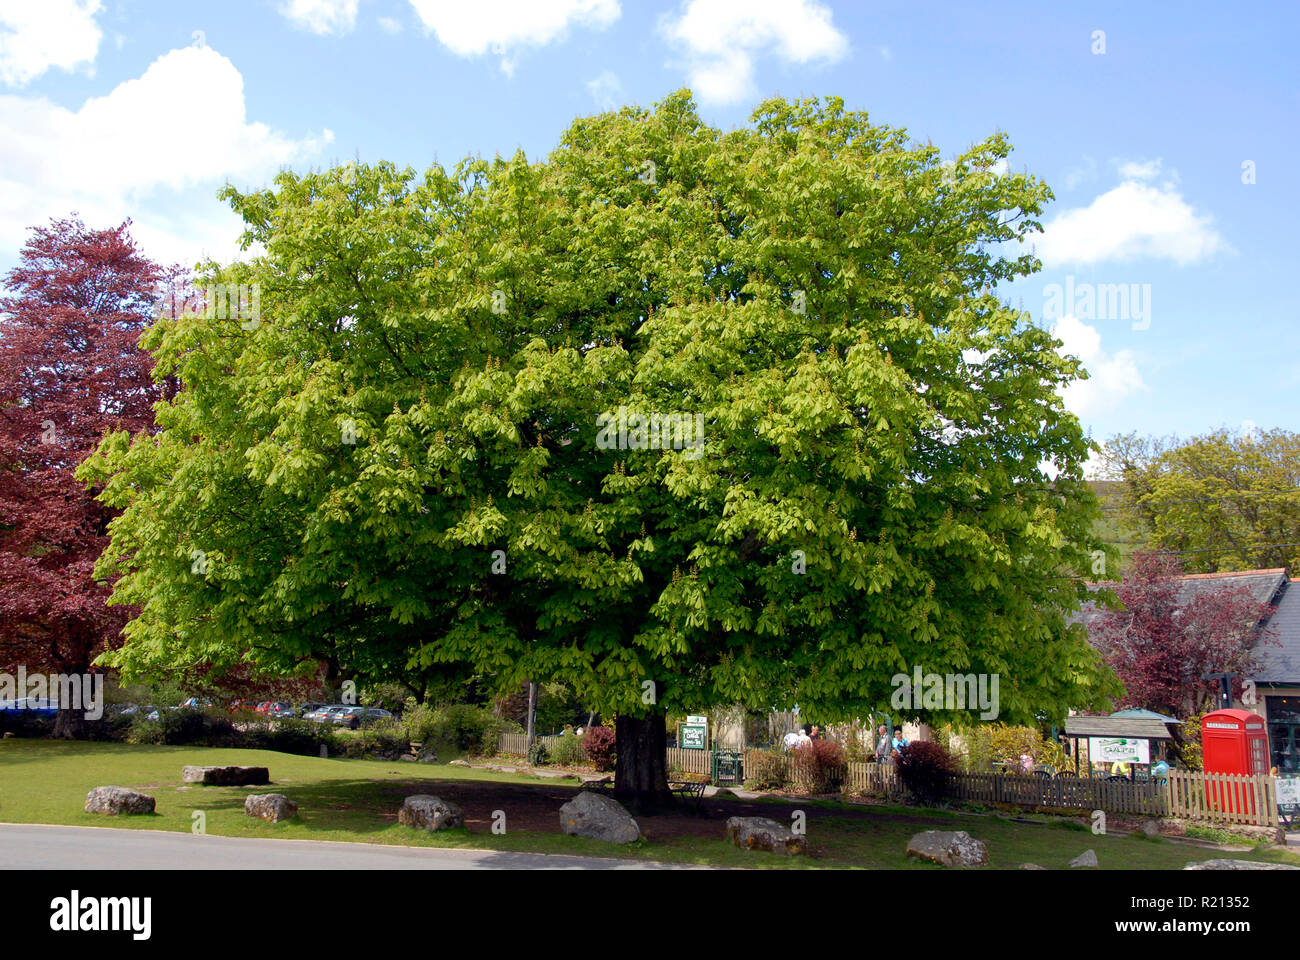 Magnificent horse chestnut tree on village green, Widecombe-in-the-Moor, Devon, England Stock Photo